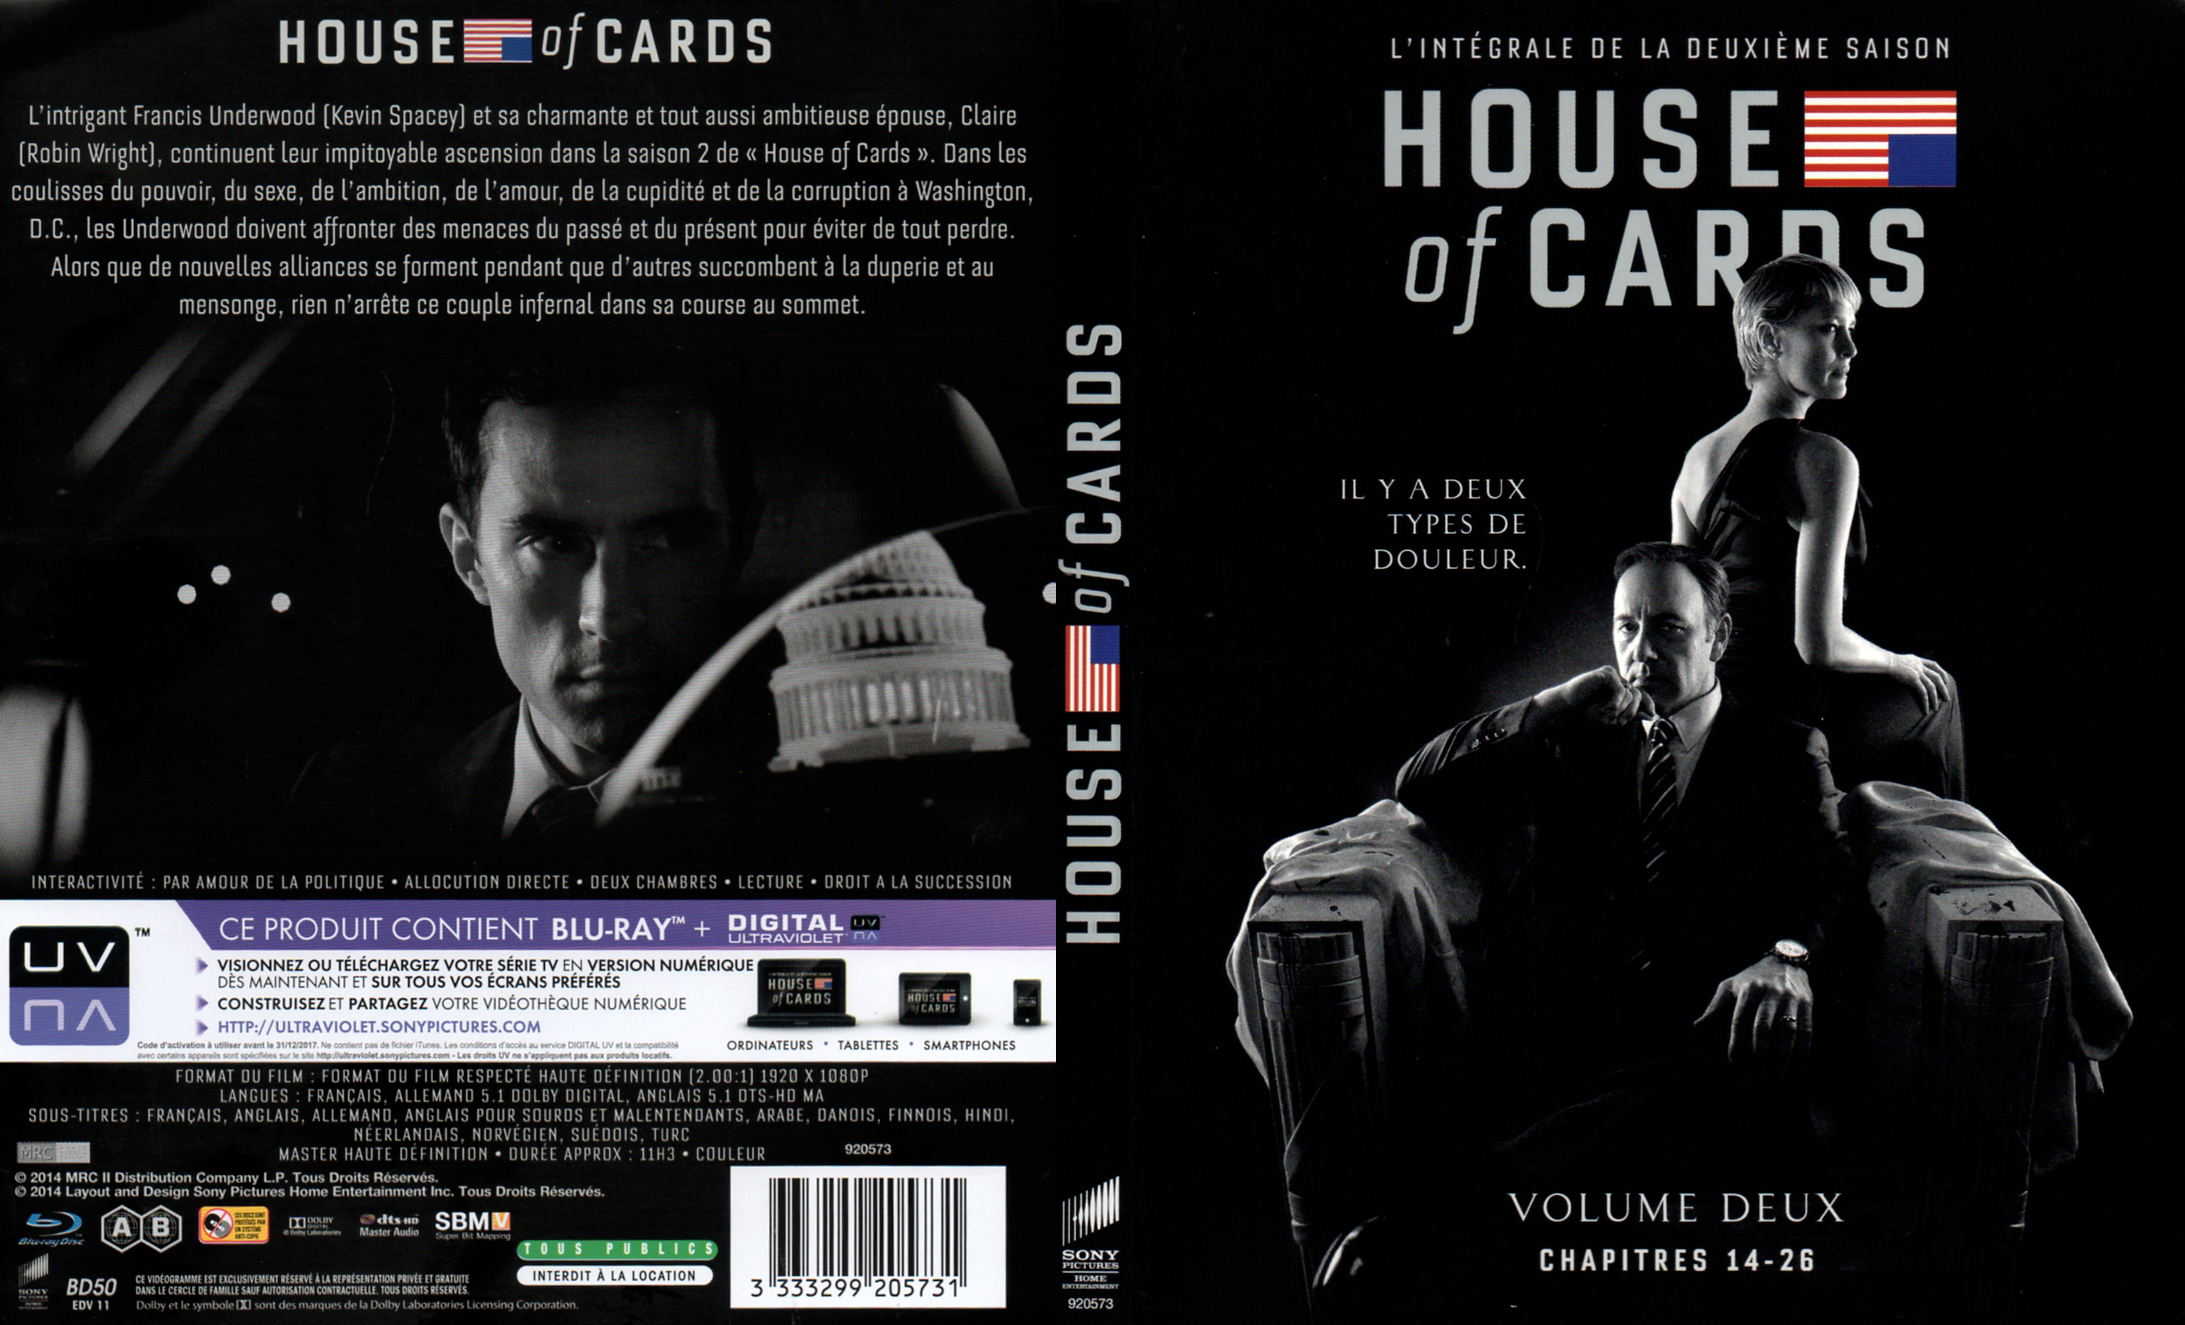 Jaquette DVD House Of Cards Saison 2 vol 2 (BLU-RAY)